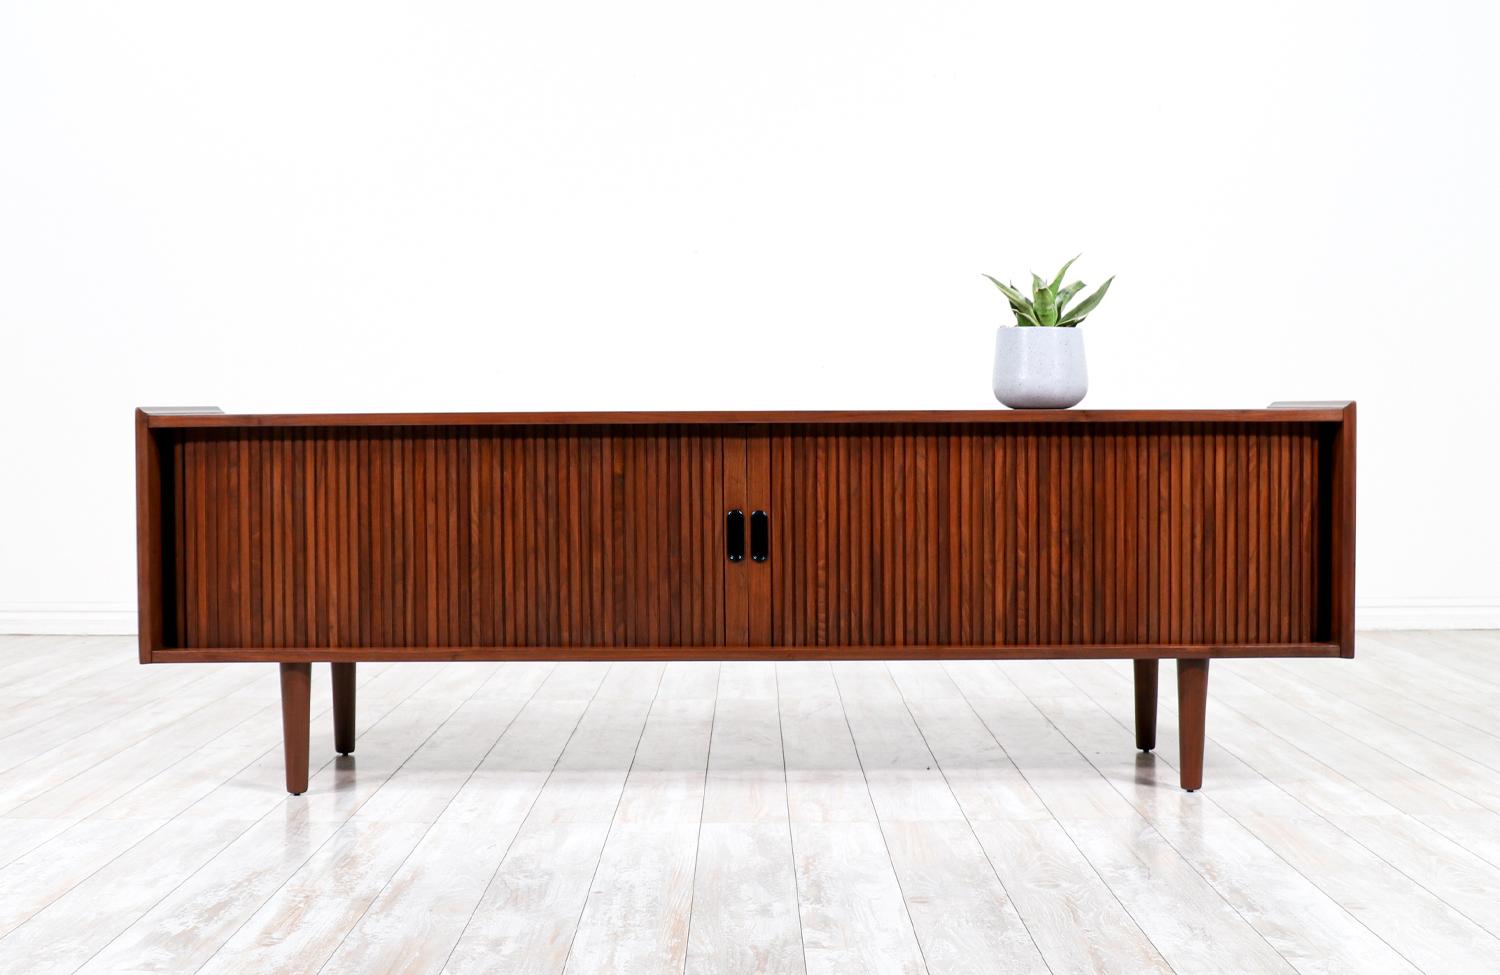 Spacious tambour-door credenza designed by Merton L. Gershun for Dillingham in the United States circa 1960’s. Crafted with walnut wood and newly refinished by our skilled craftsmen, this credenza features two tambour doors with recessed pulls that